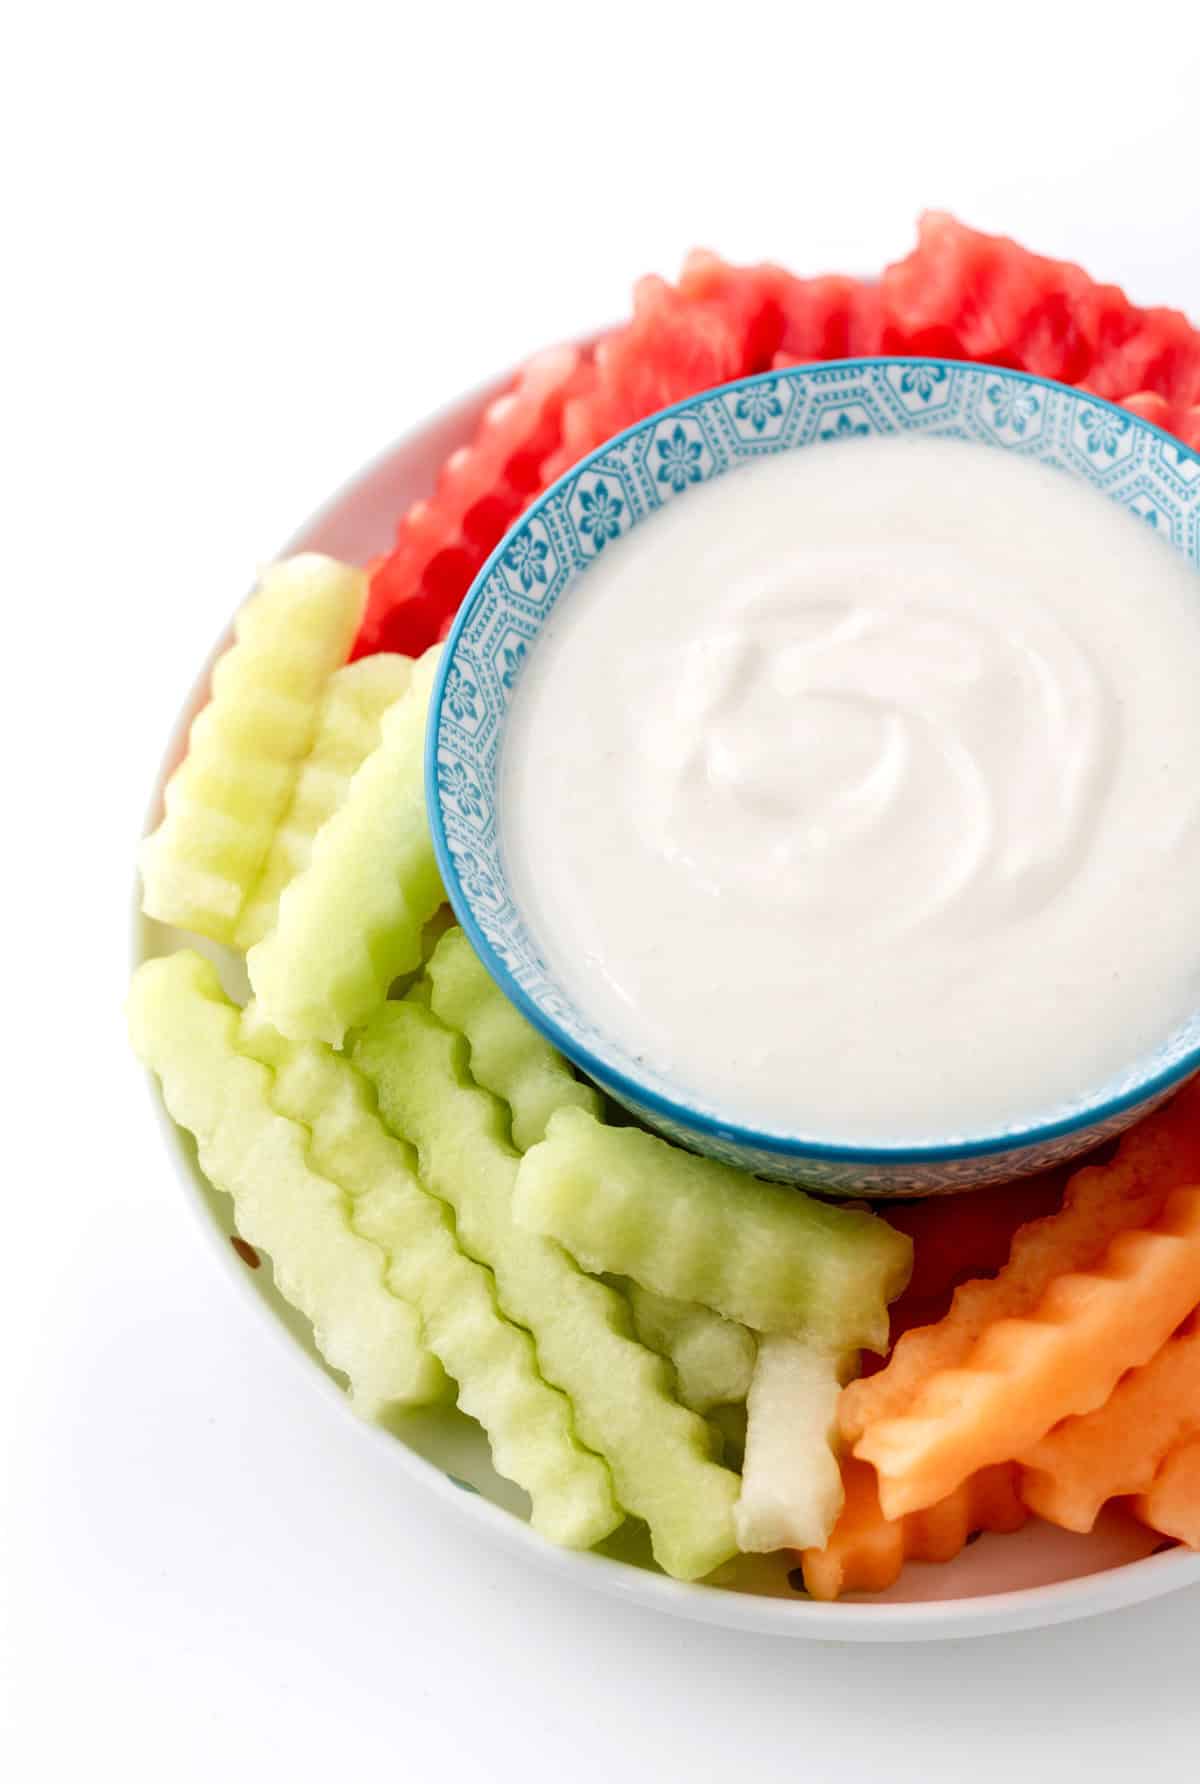 A close-up of fruit fries on a platter with a bowl of Greek yogurt dip in the middle.